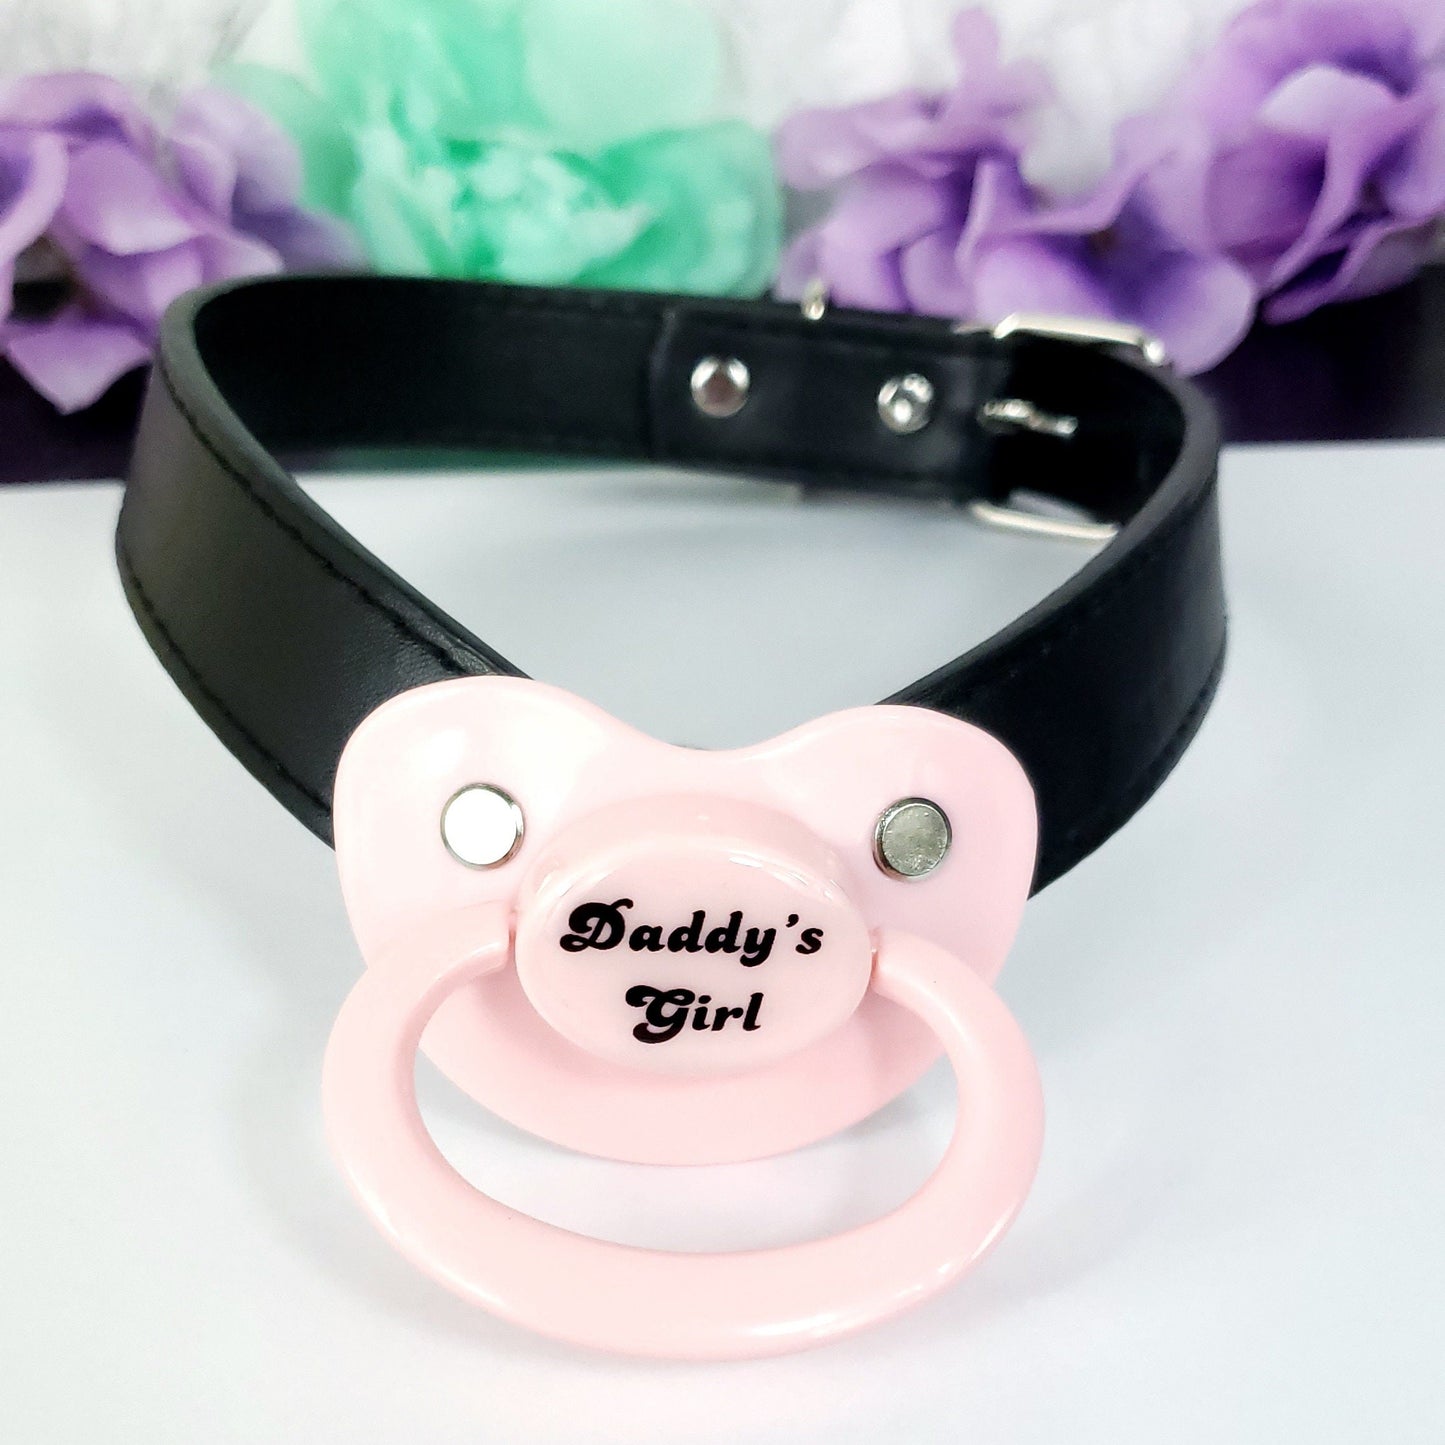 Daddy's Girl Adult Pacifier Gag